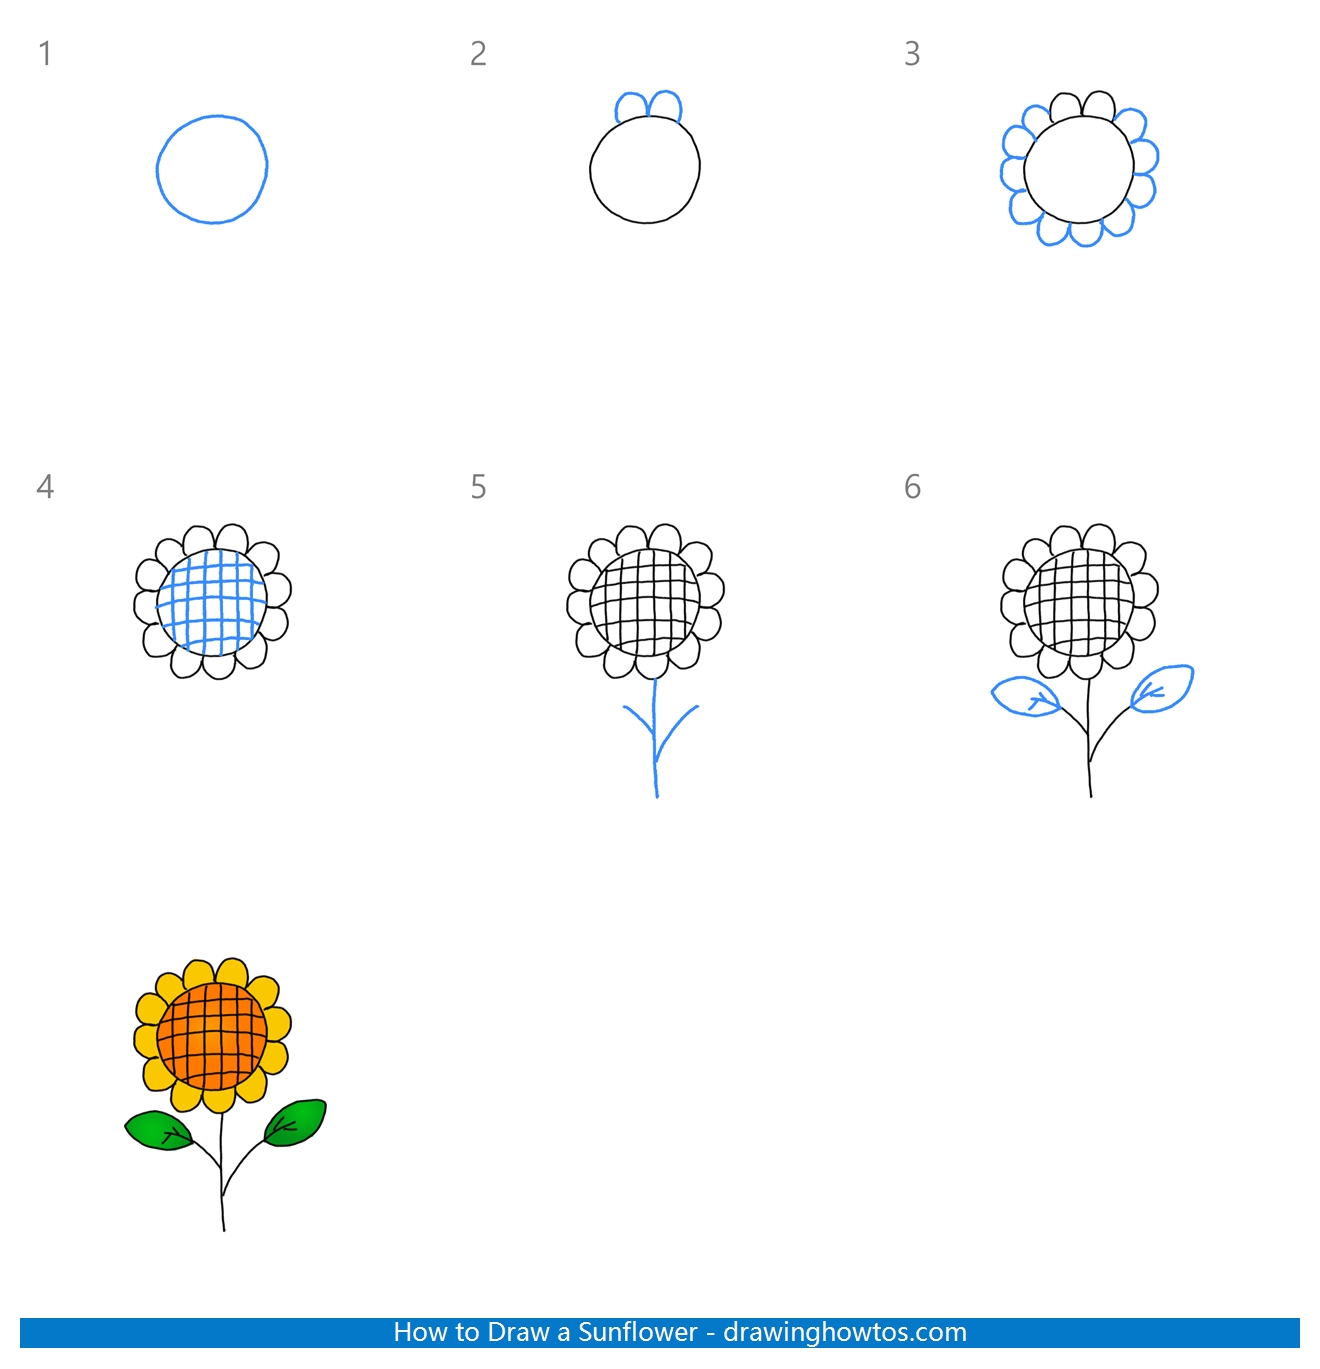 How to Draw a Sunflower Easy Step by Step